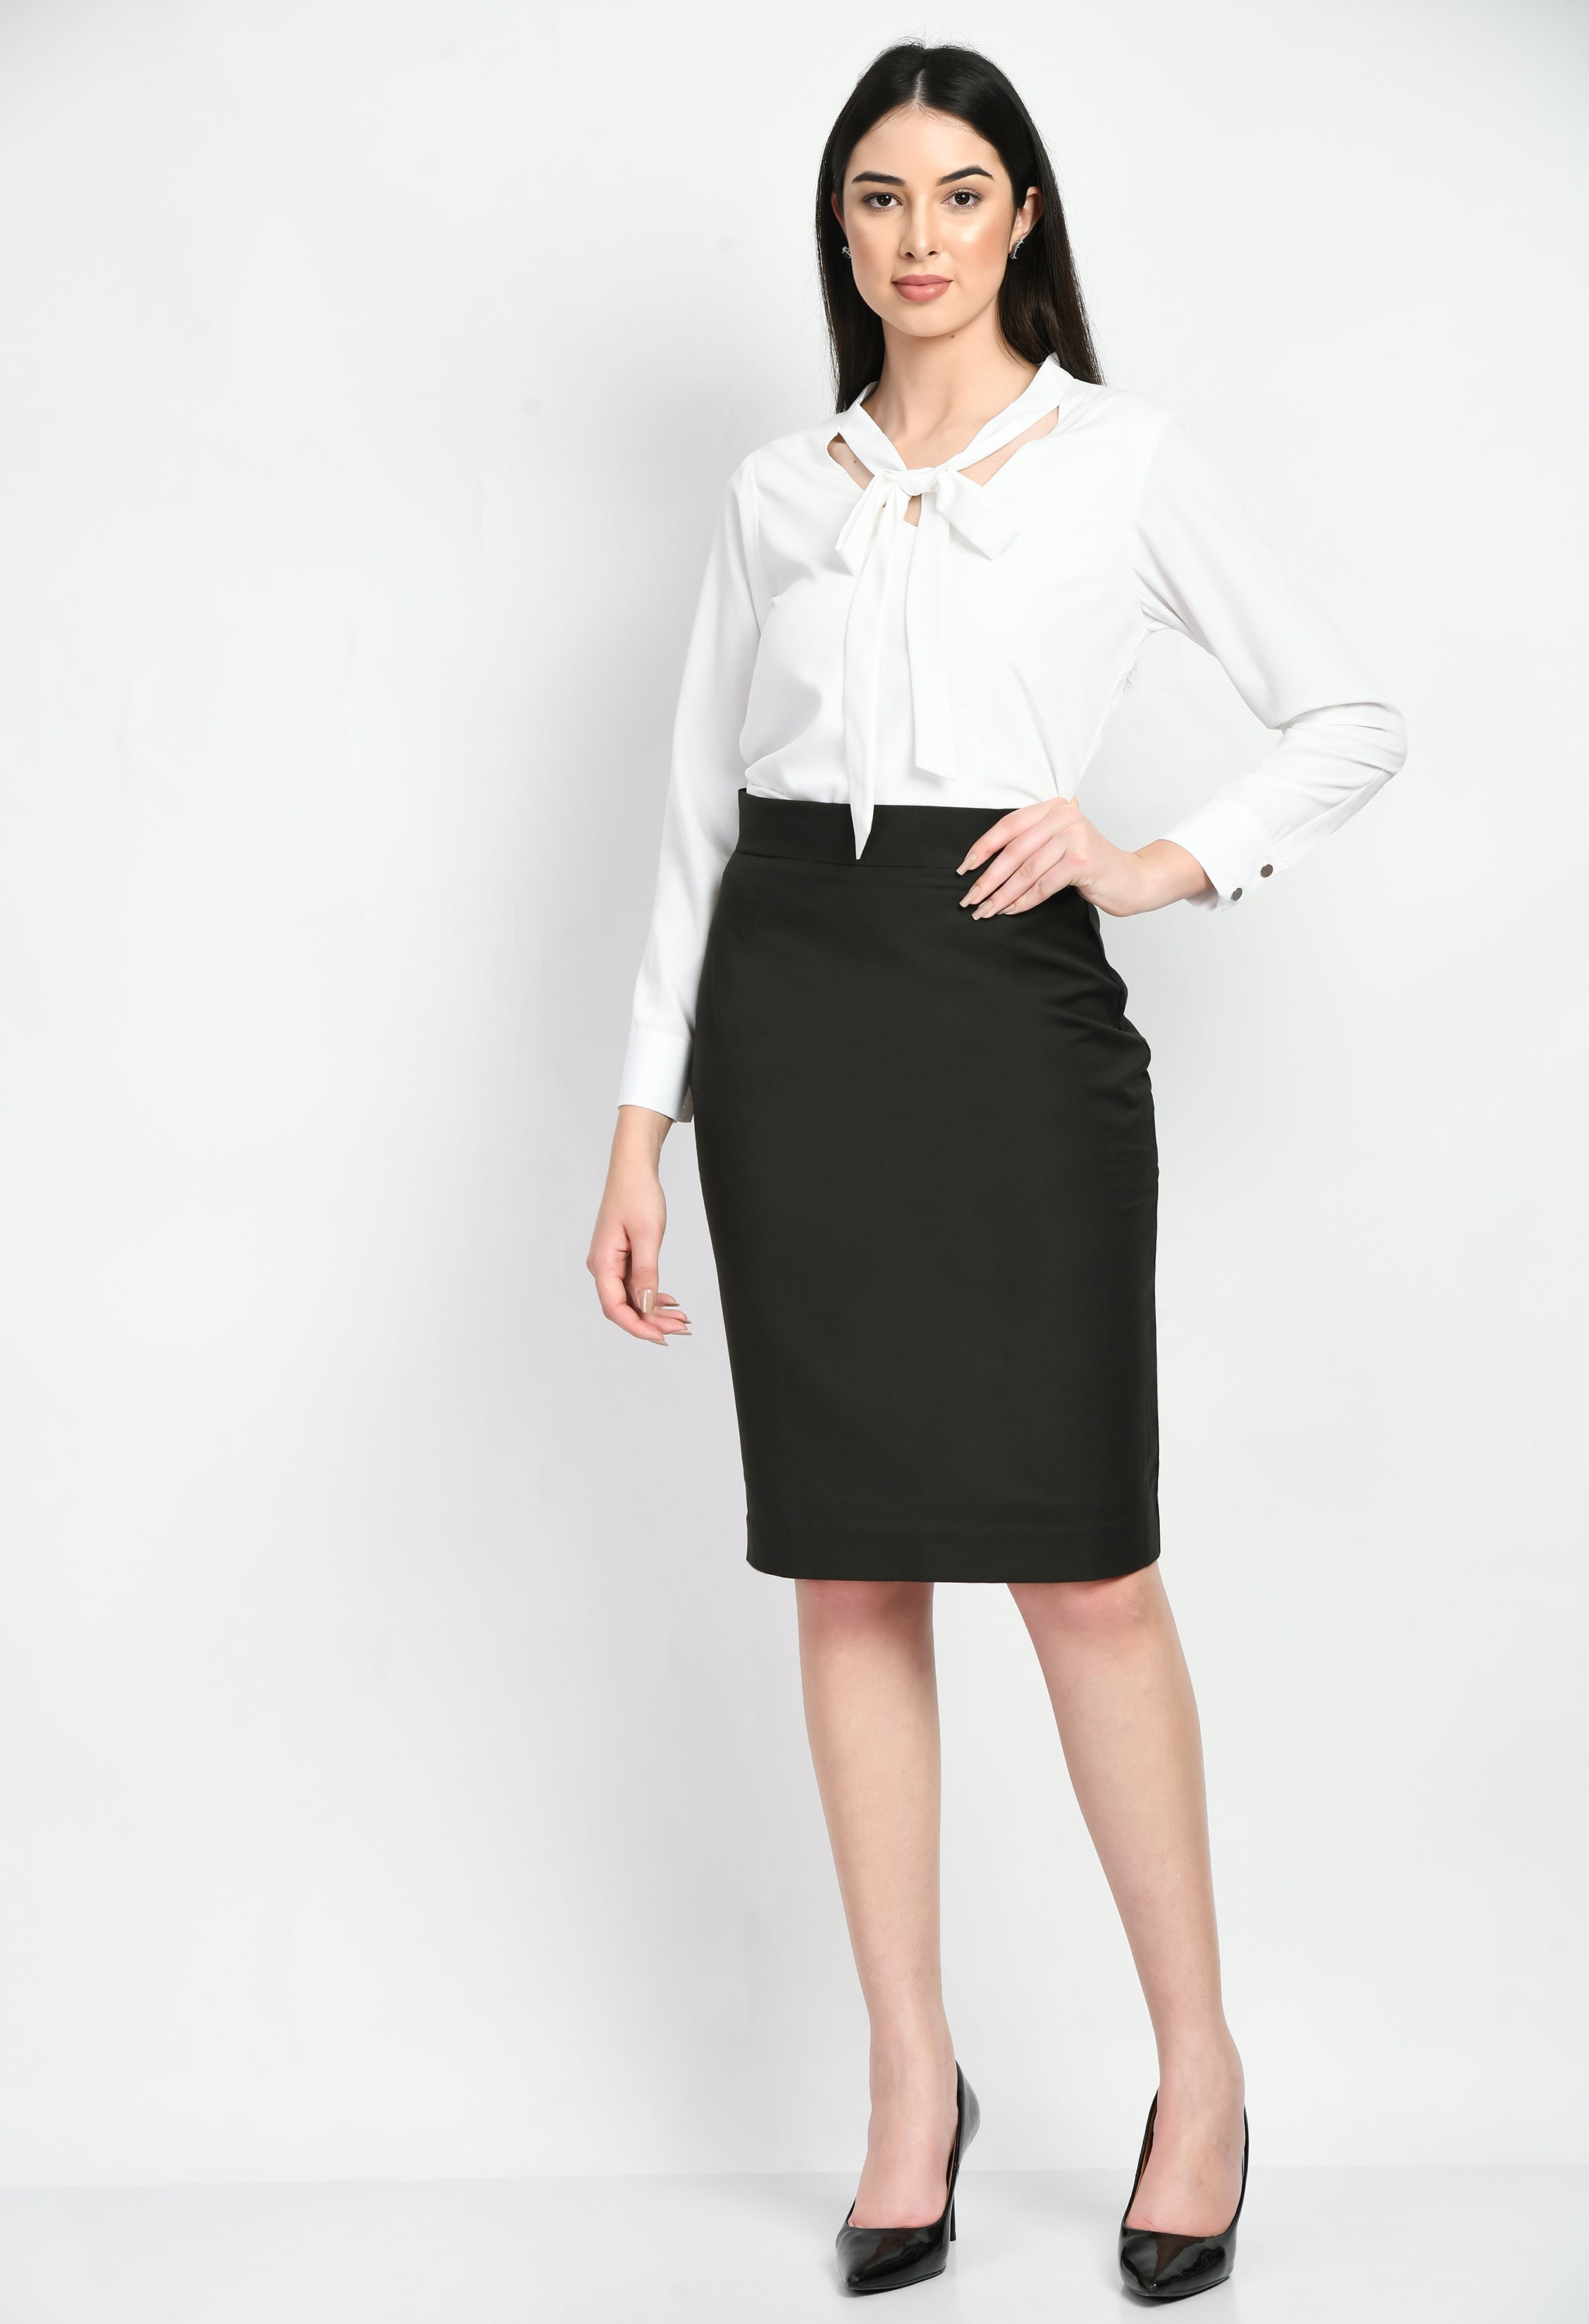 Exude Integrity Solid Pencil Skirt (Olive)